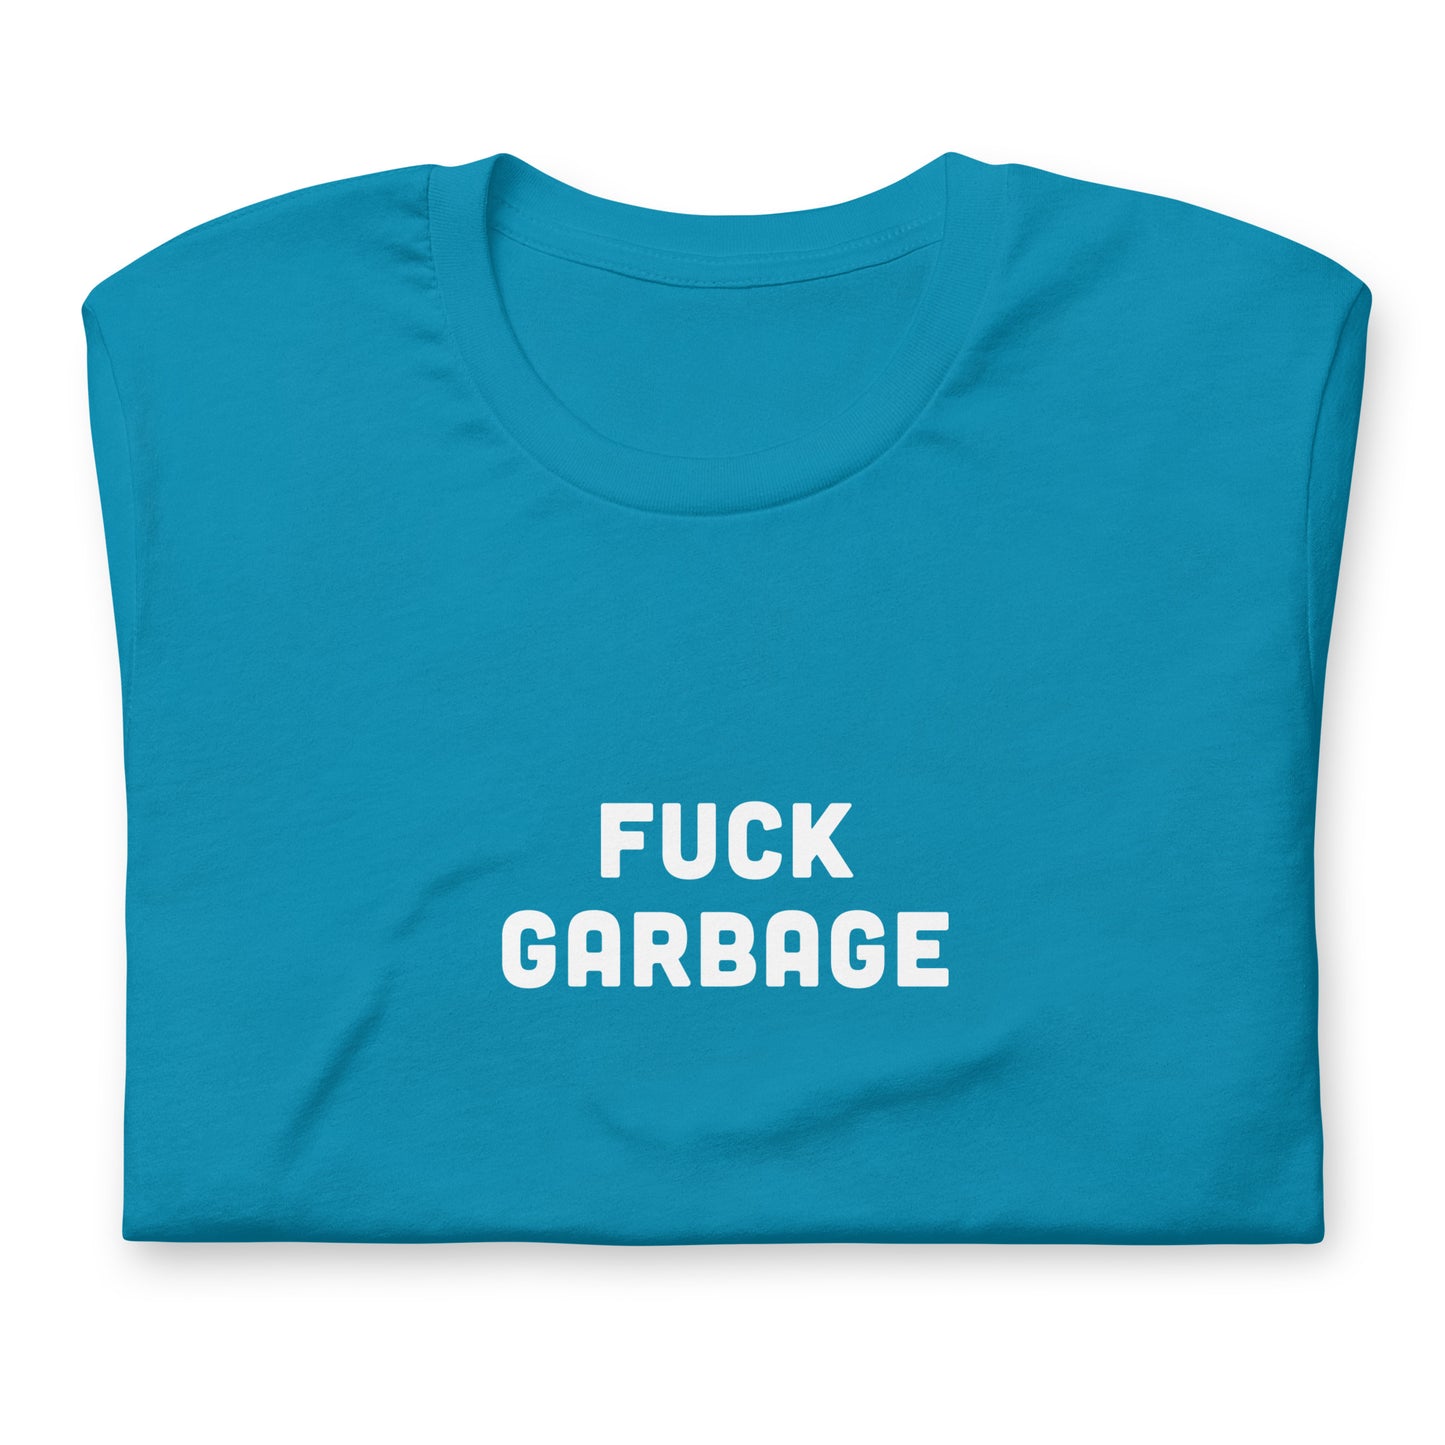 Fuck Garbage T-Shirt Size M Color Navy